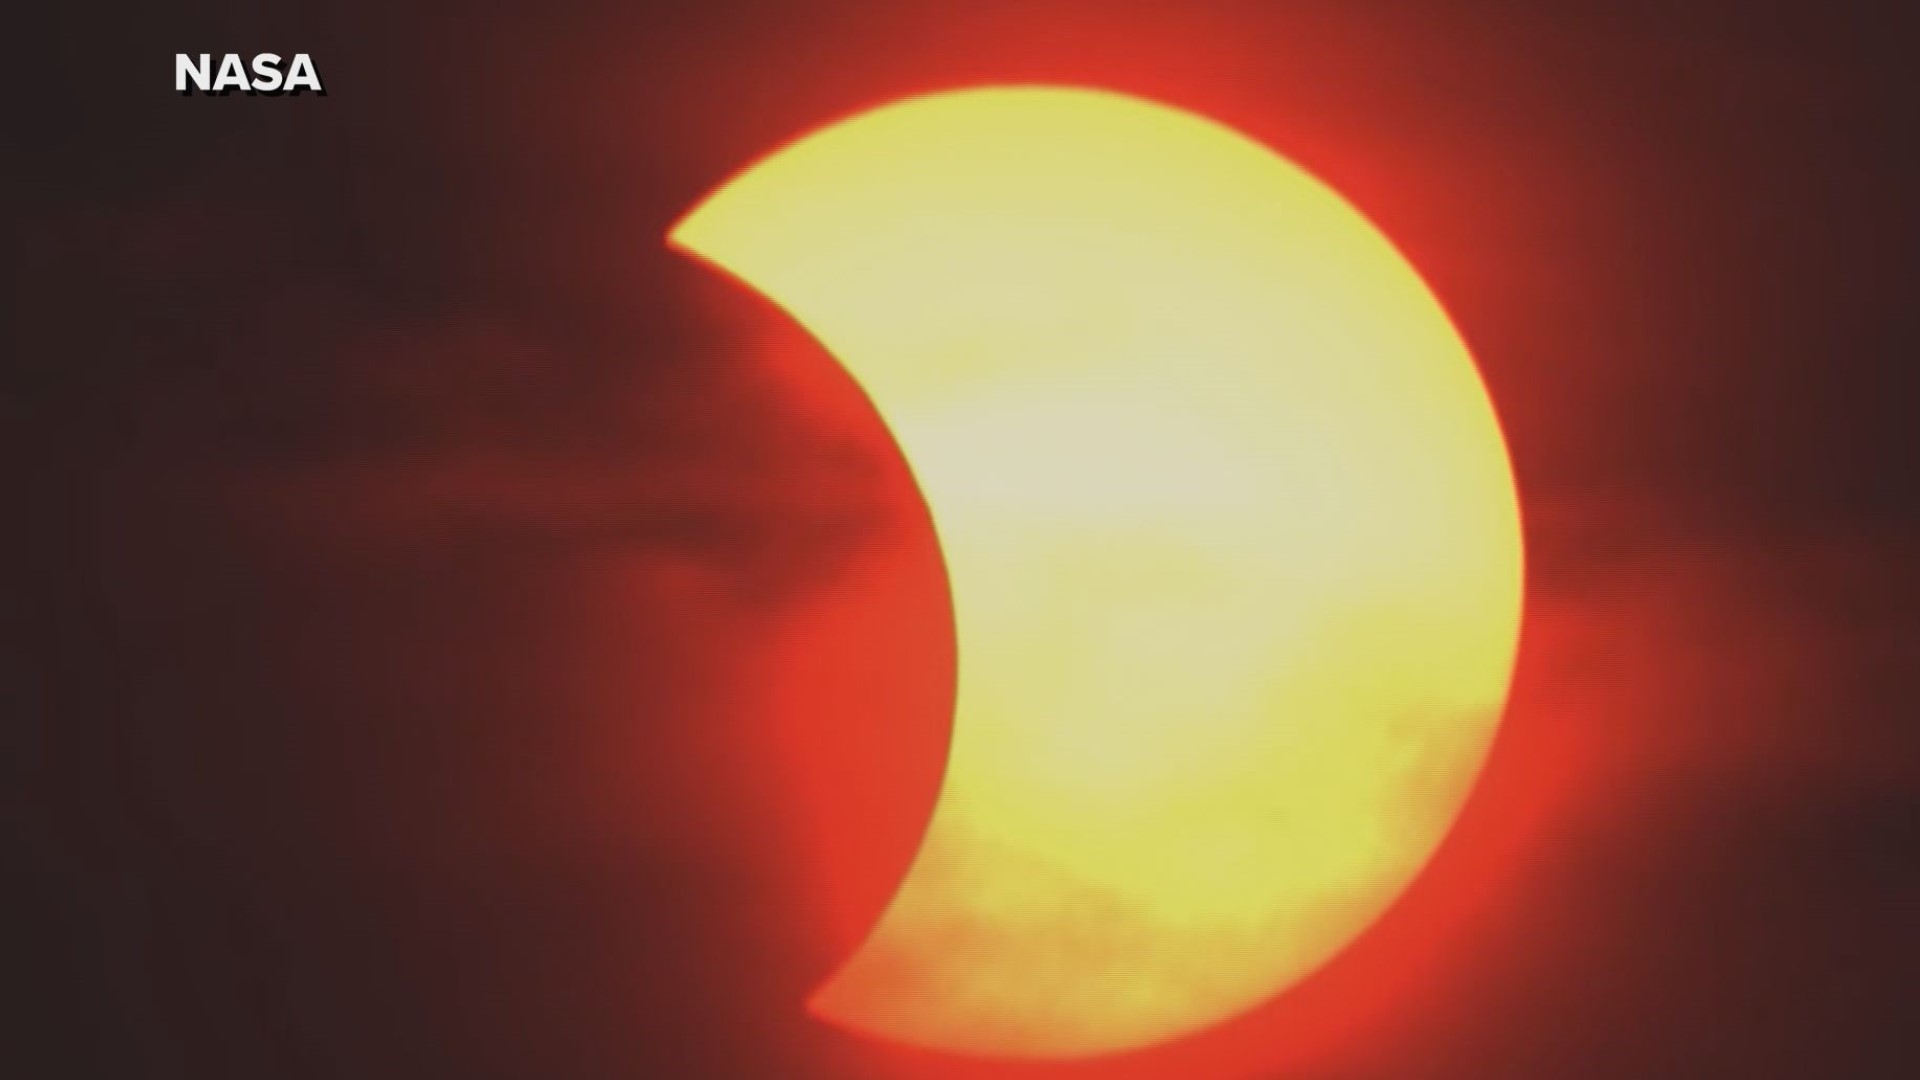 The top of the world got a sunrise special _ a “ring of fire” solar eclipse.